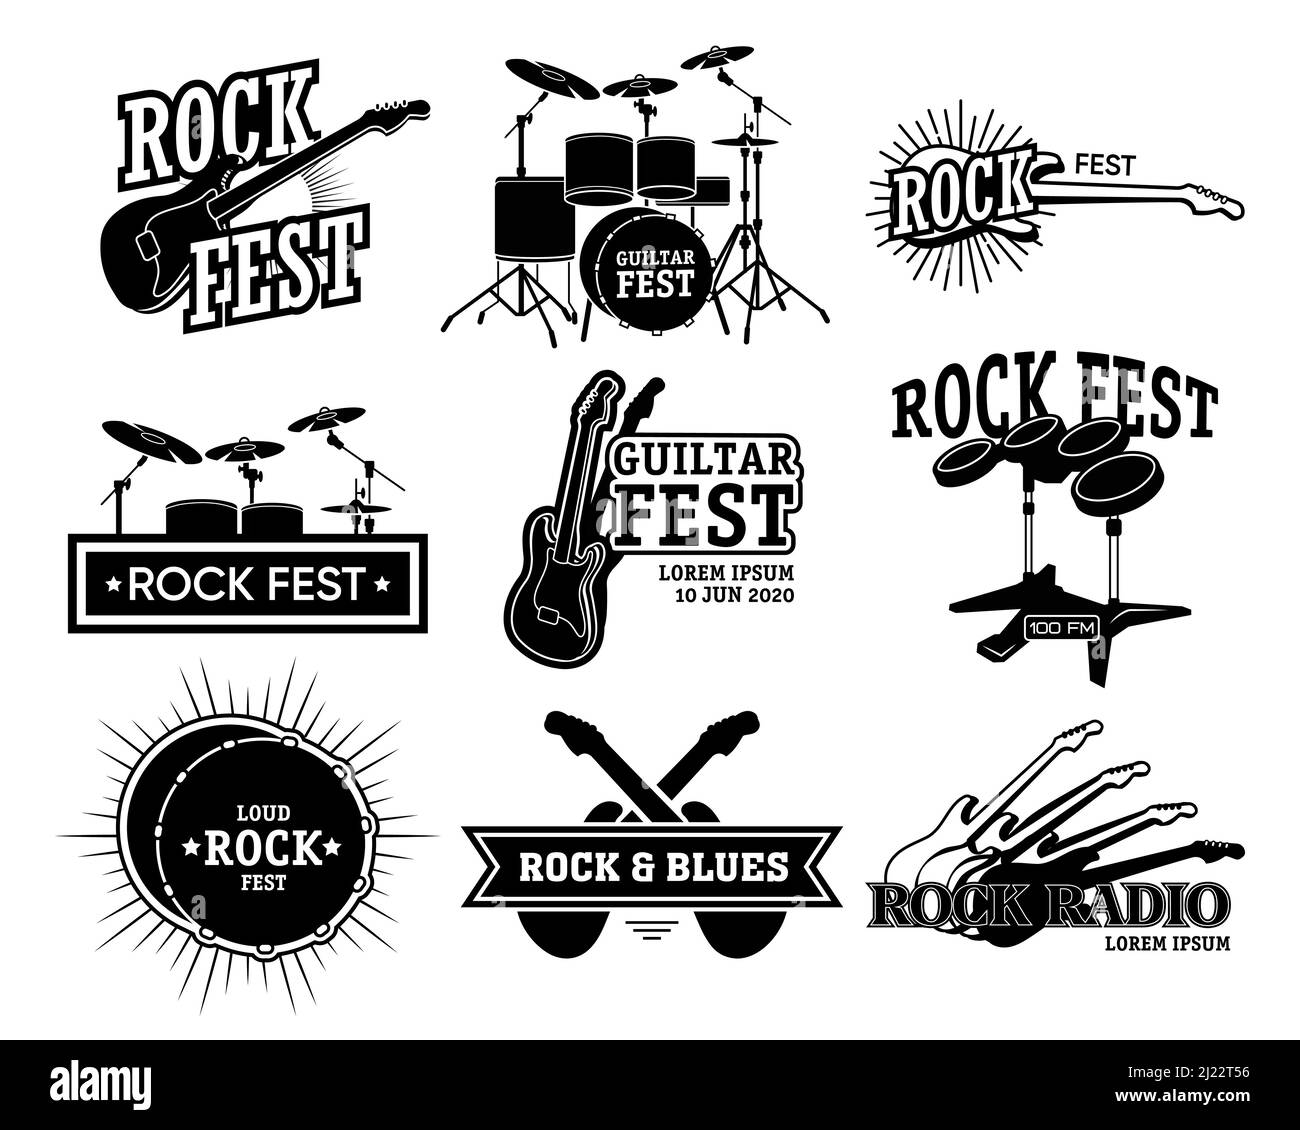 Rock music retro emblem collection. Monochrome isolated illustrations of guitar and drums, rock fest and radio text. For concert announcement, blues b Stock Vector